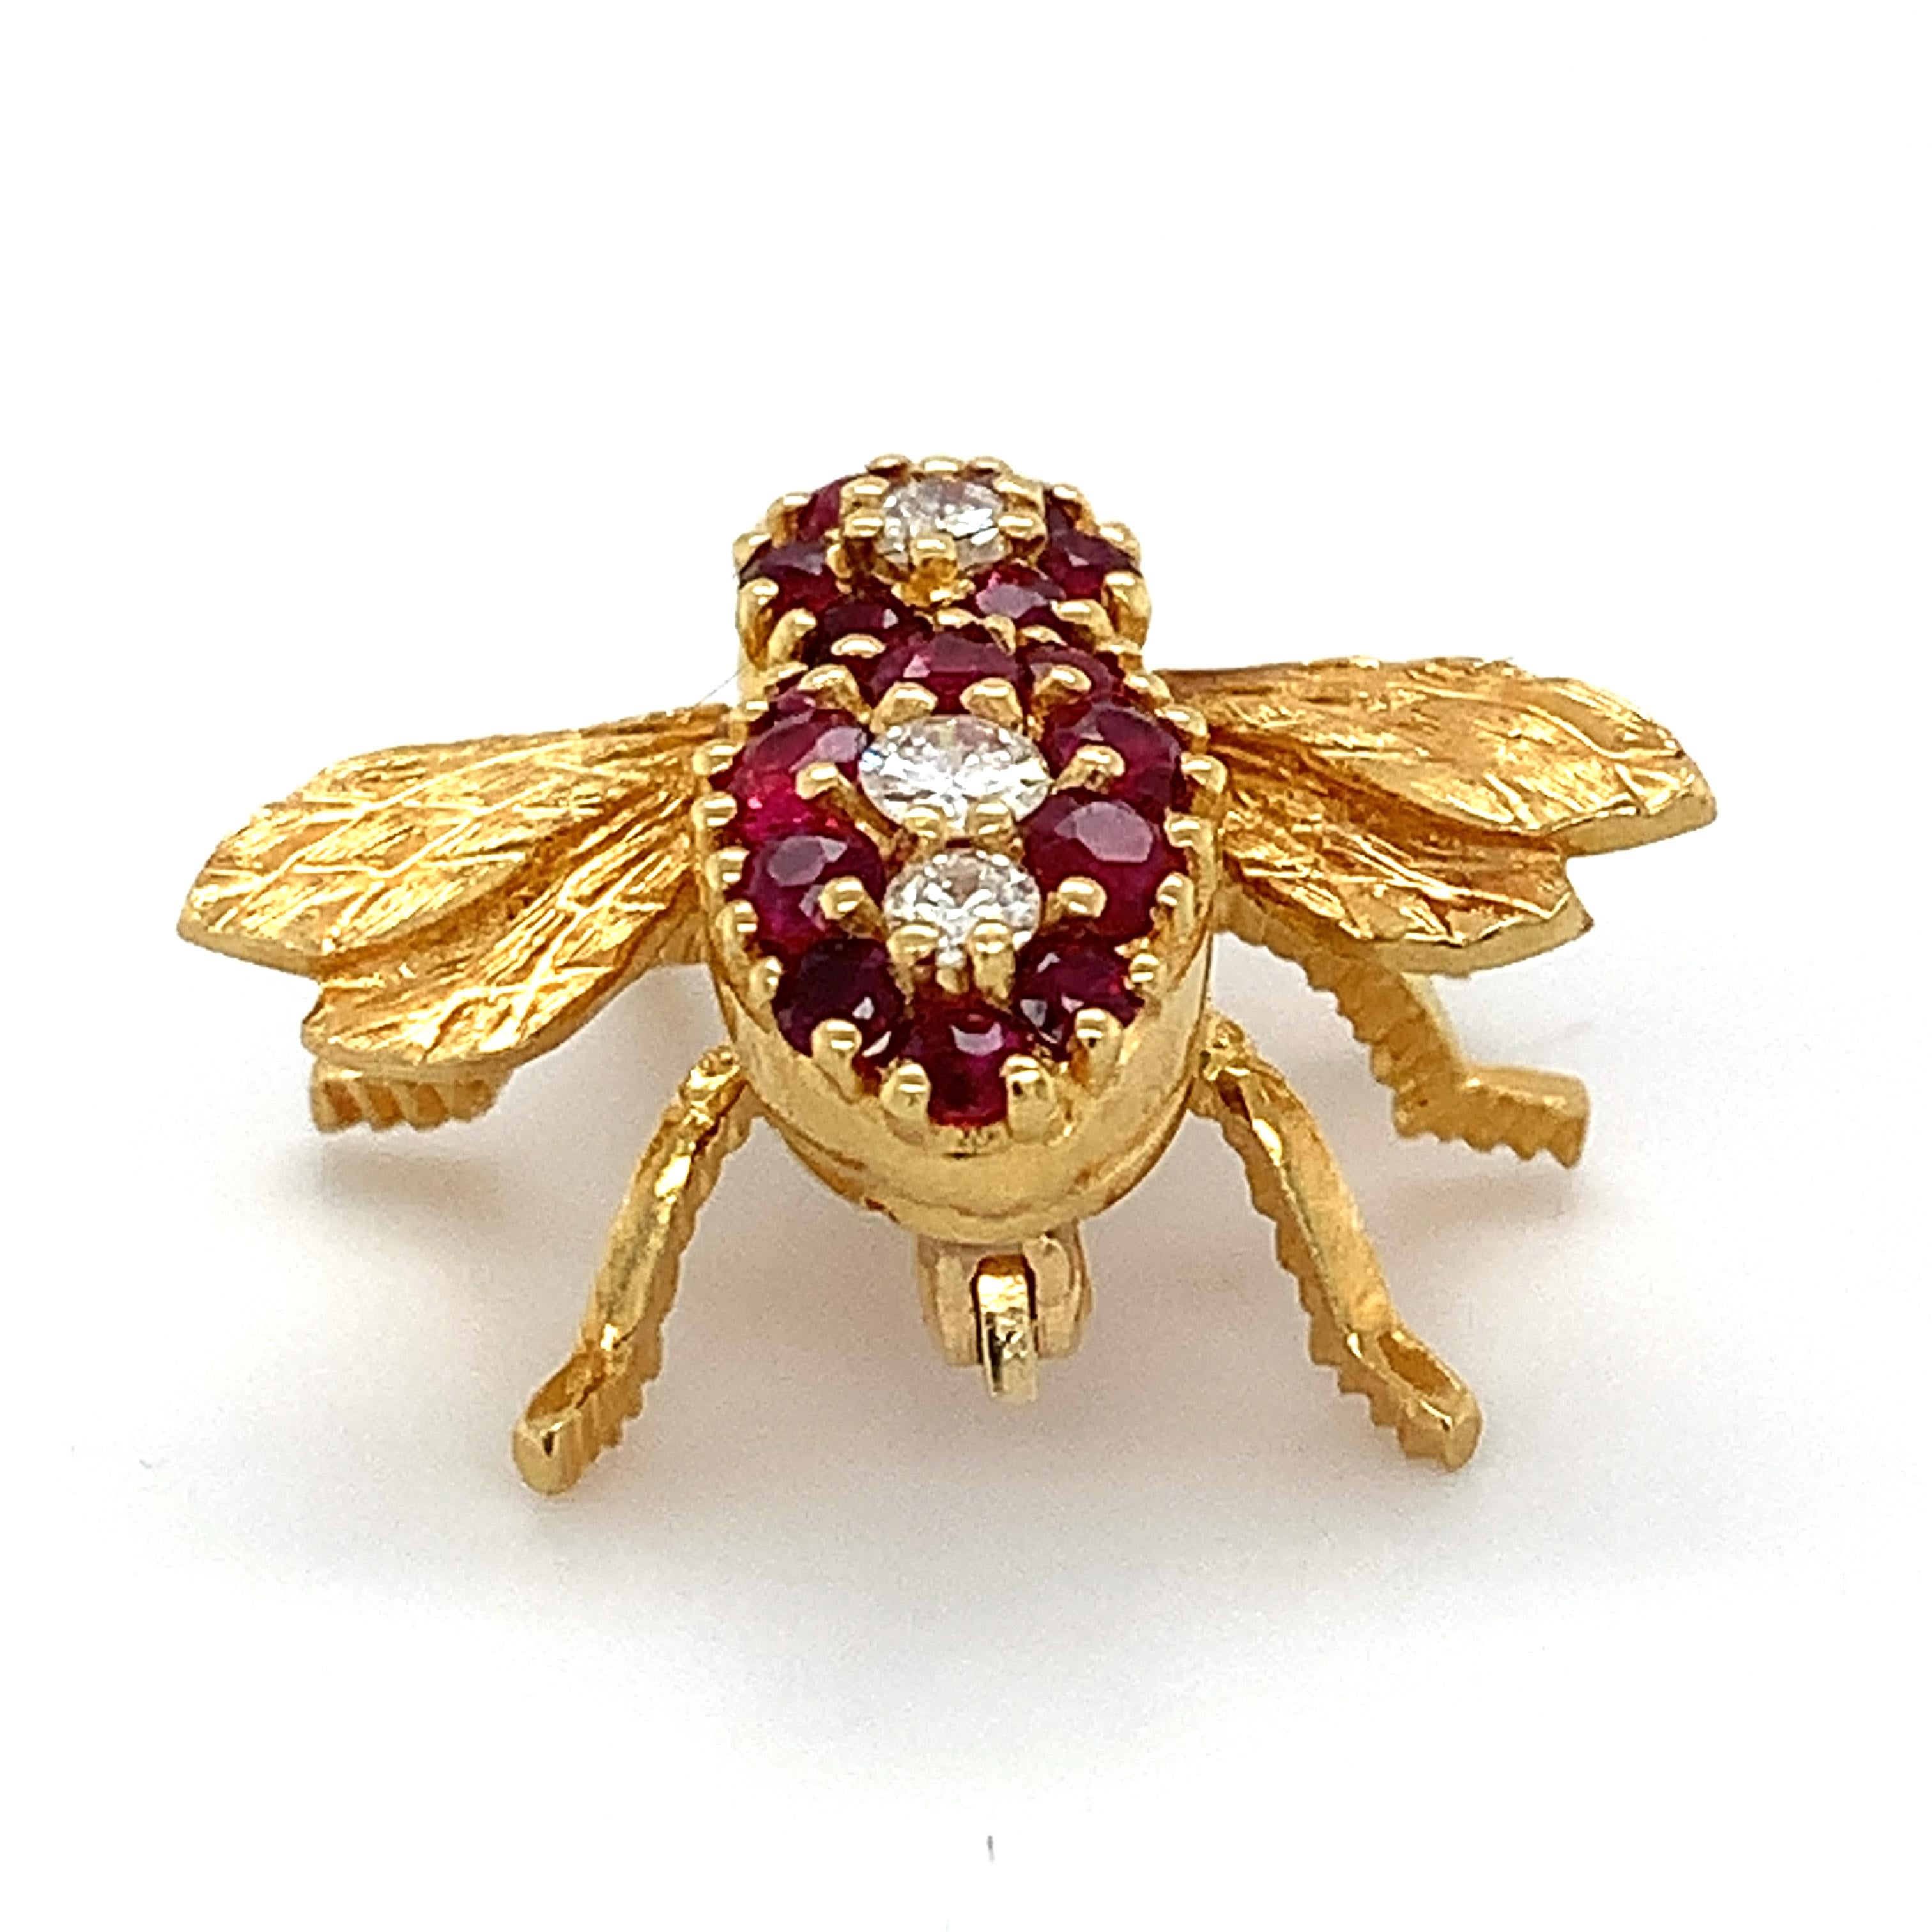 Herbert Rosenthal 18k Yellow Gold Red Ruby And Round Diamond Bee Pin
6.3 Grams
Round Red Rubies
Round White Diamonds 
This is a beautiful 18k yellow gold Bee pin. This pin is in great condition and is stamped with the correct hallmarks. If you have